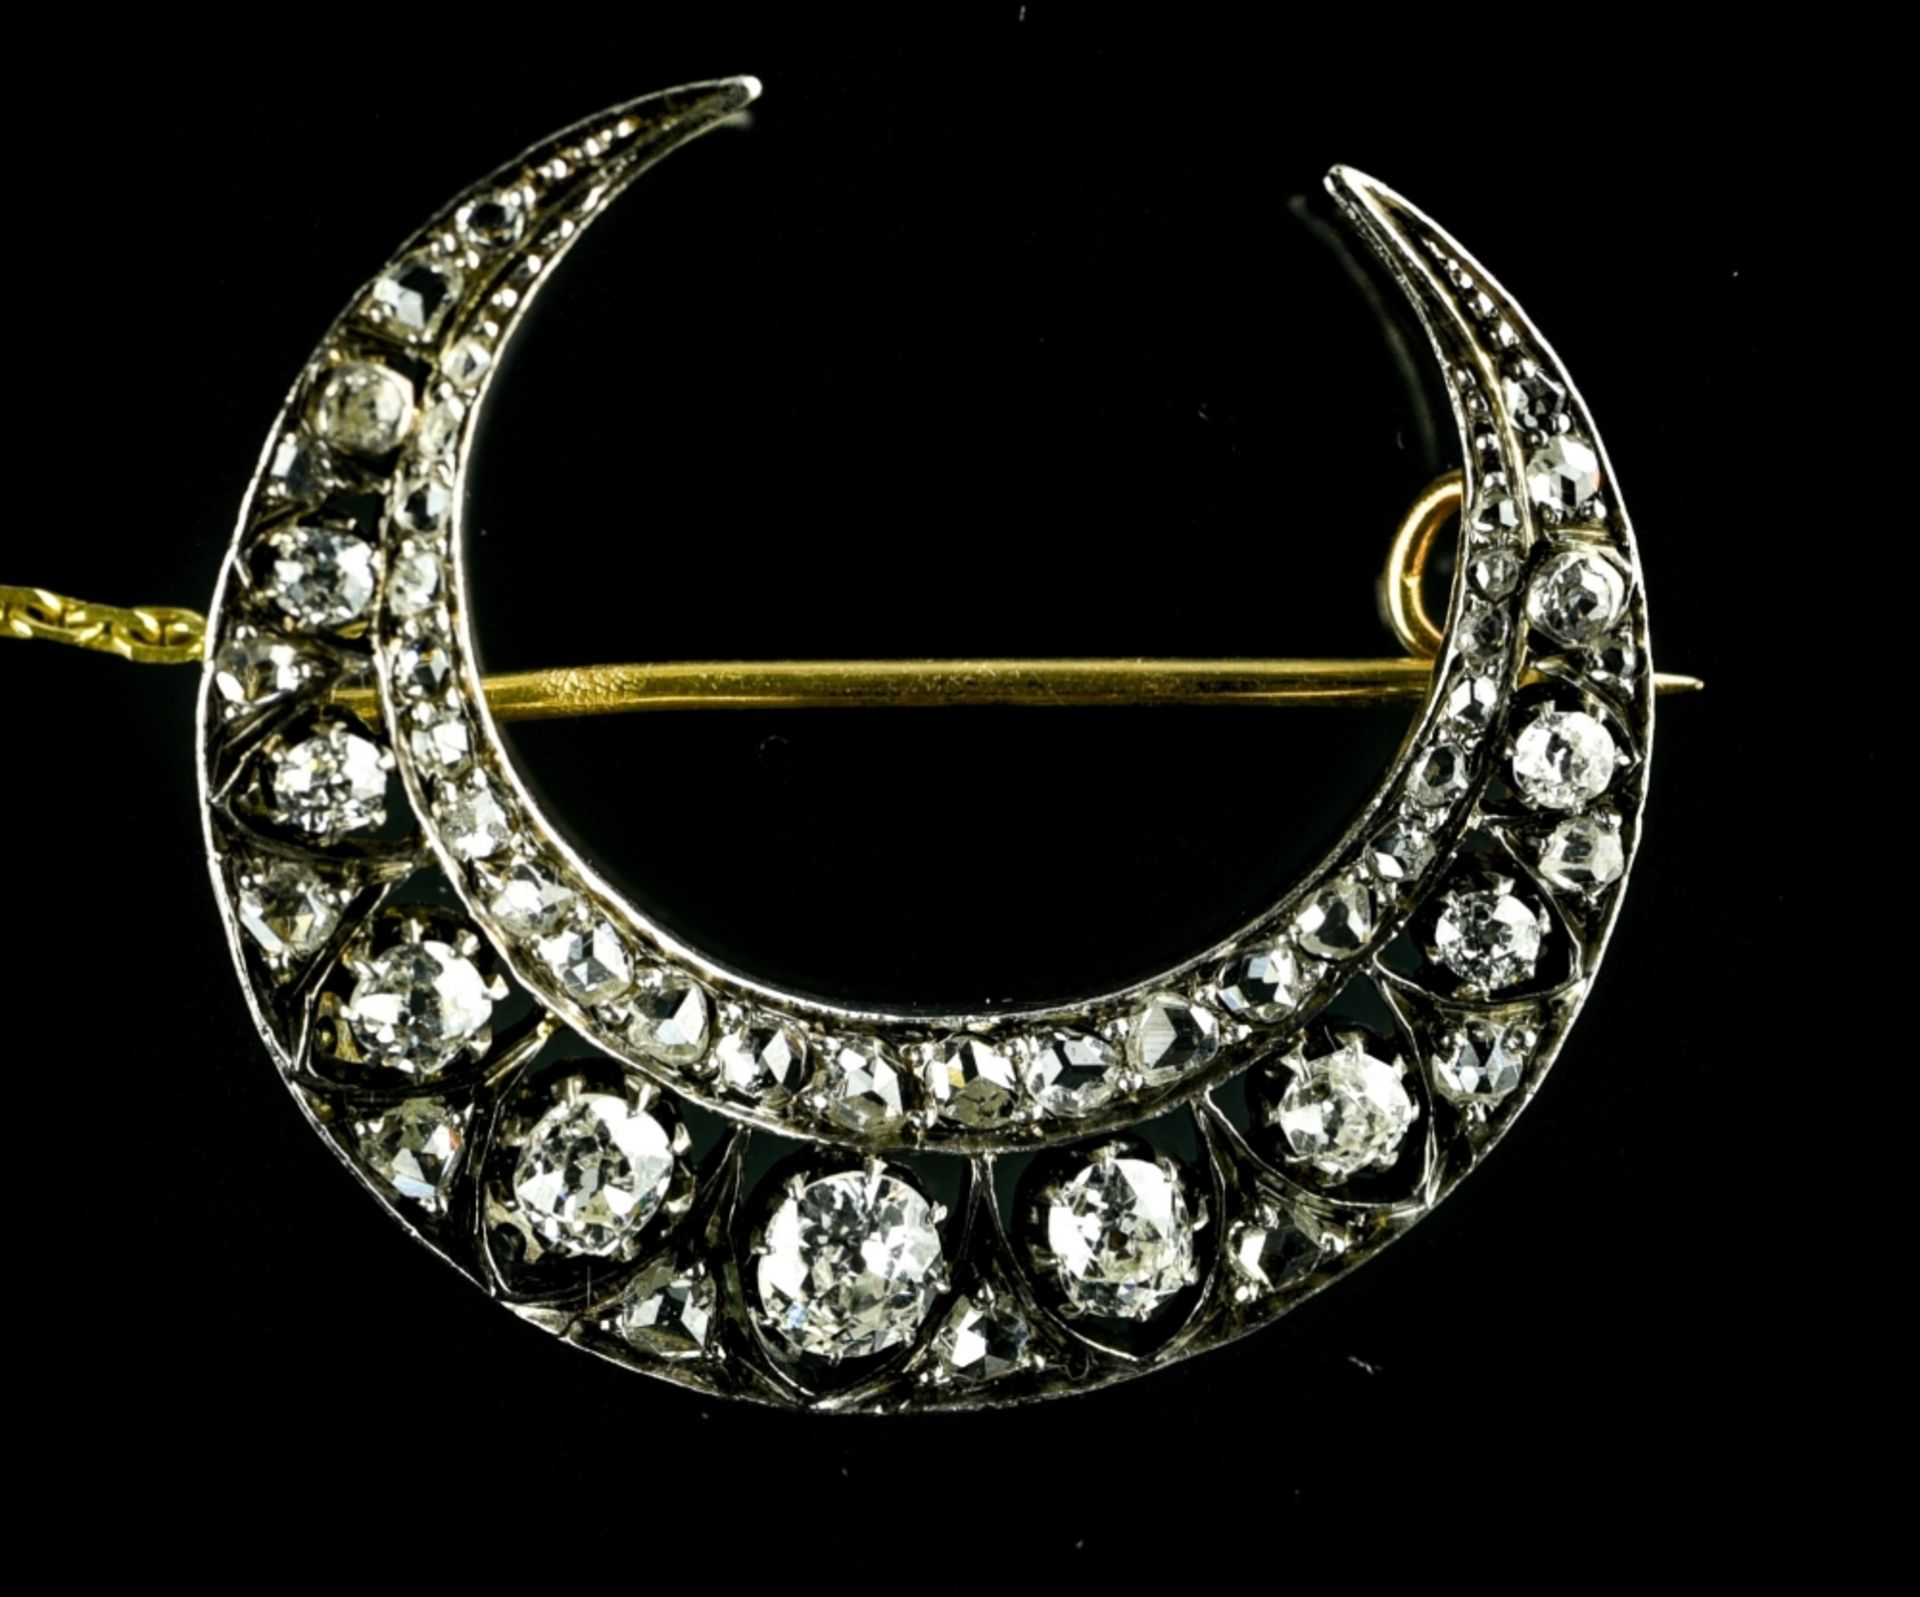 Crescent moon brooch White gold on 18 kt rose gold, set with eleven antique-cut diamonds, with an